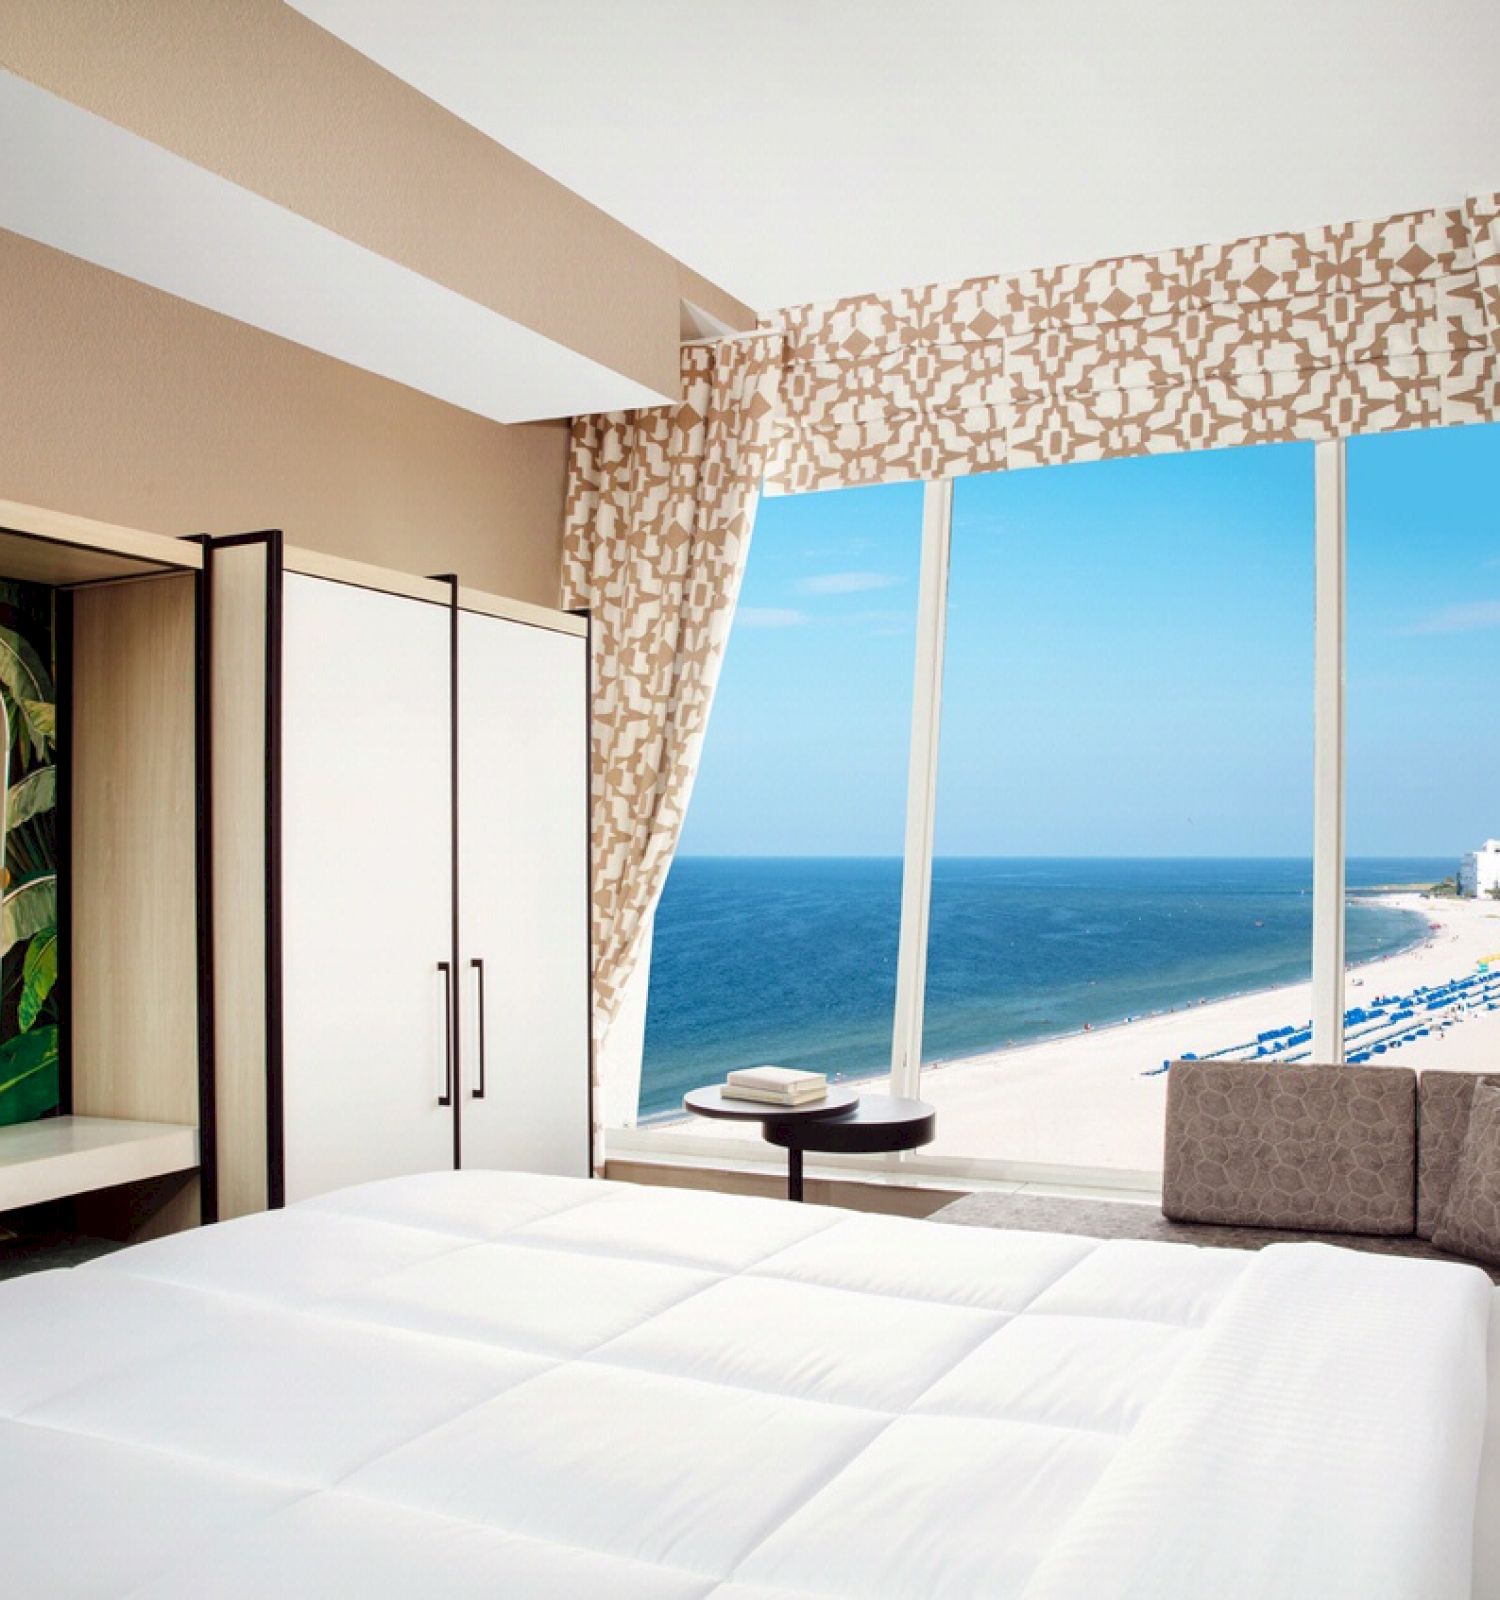 A modern hotel room with a large window overlooking the beach and ocean.